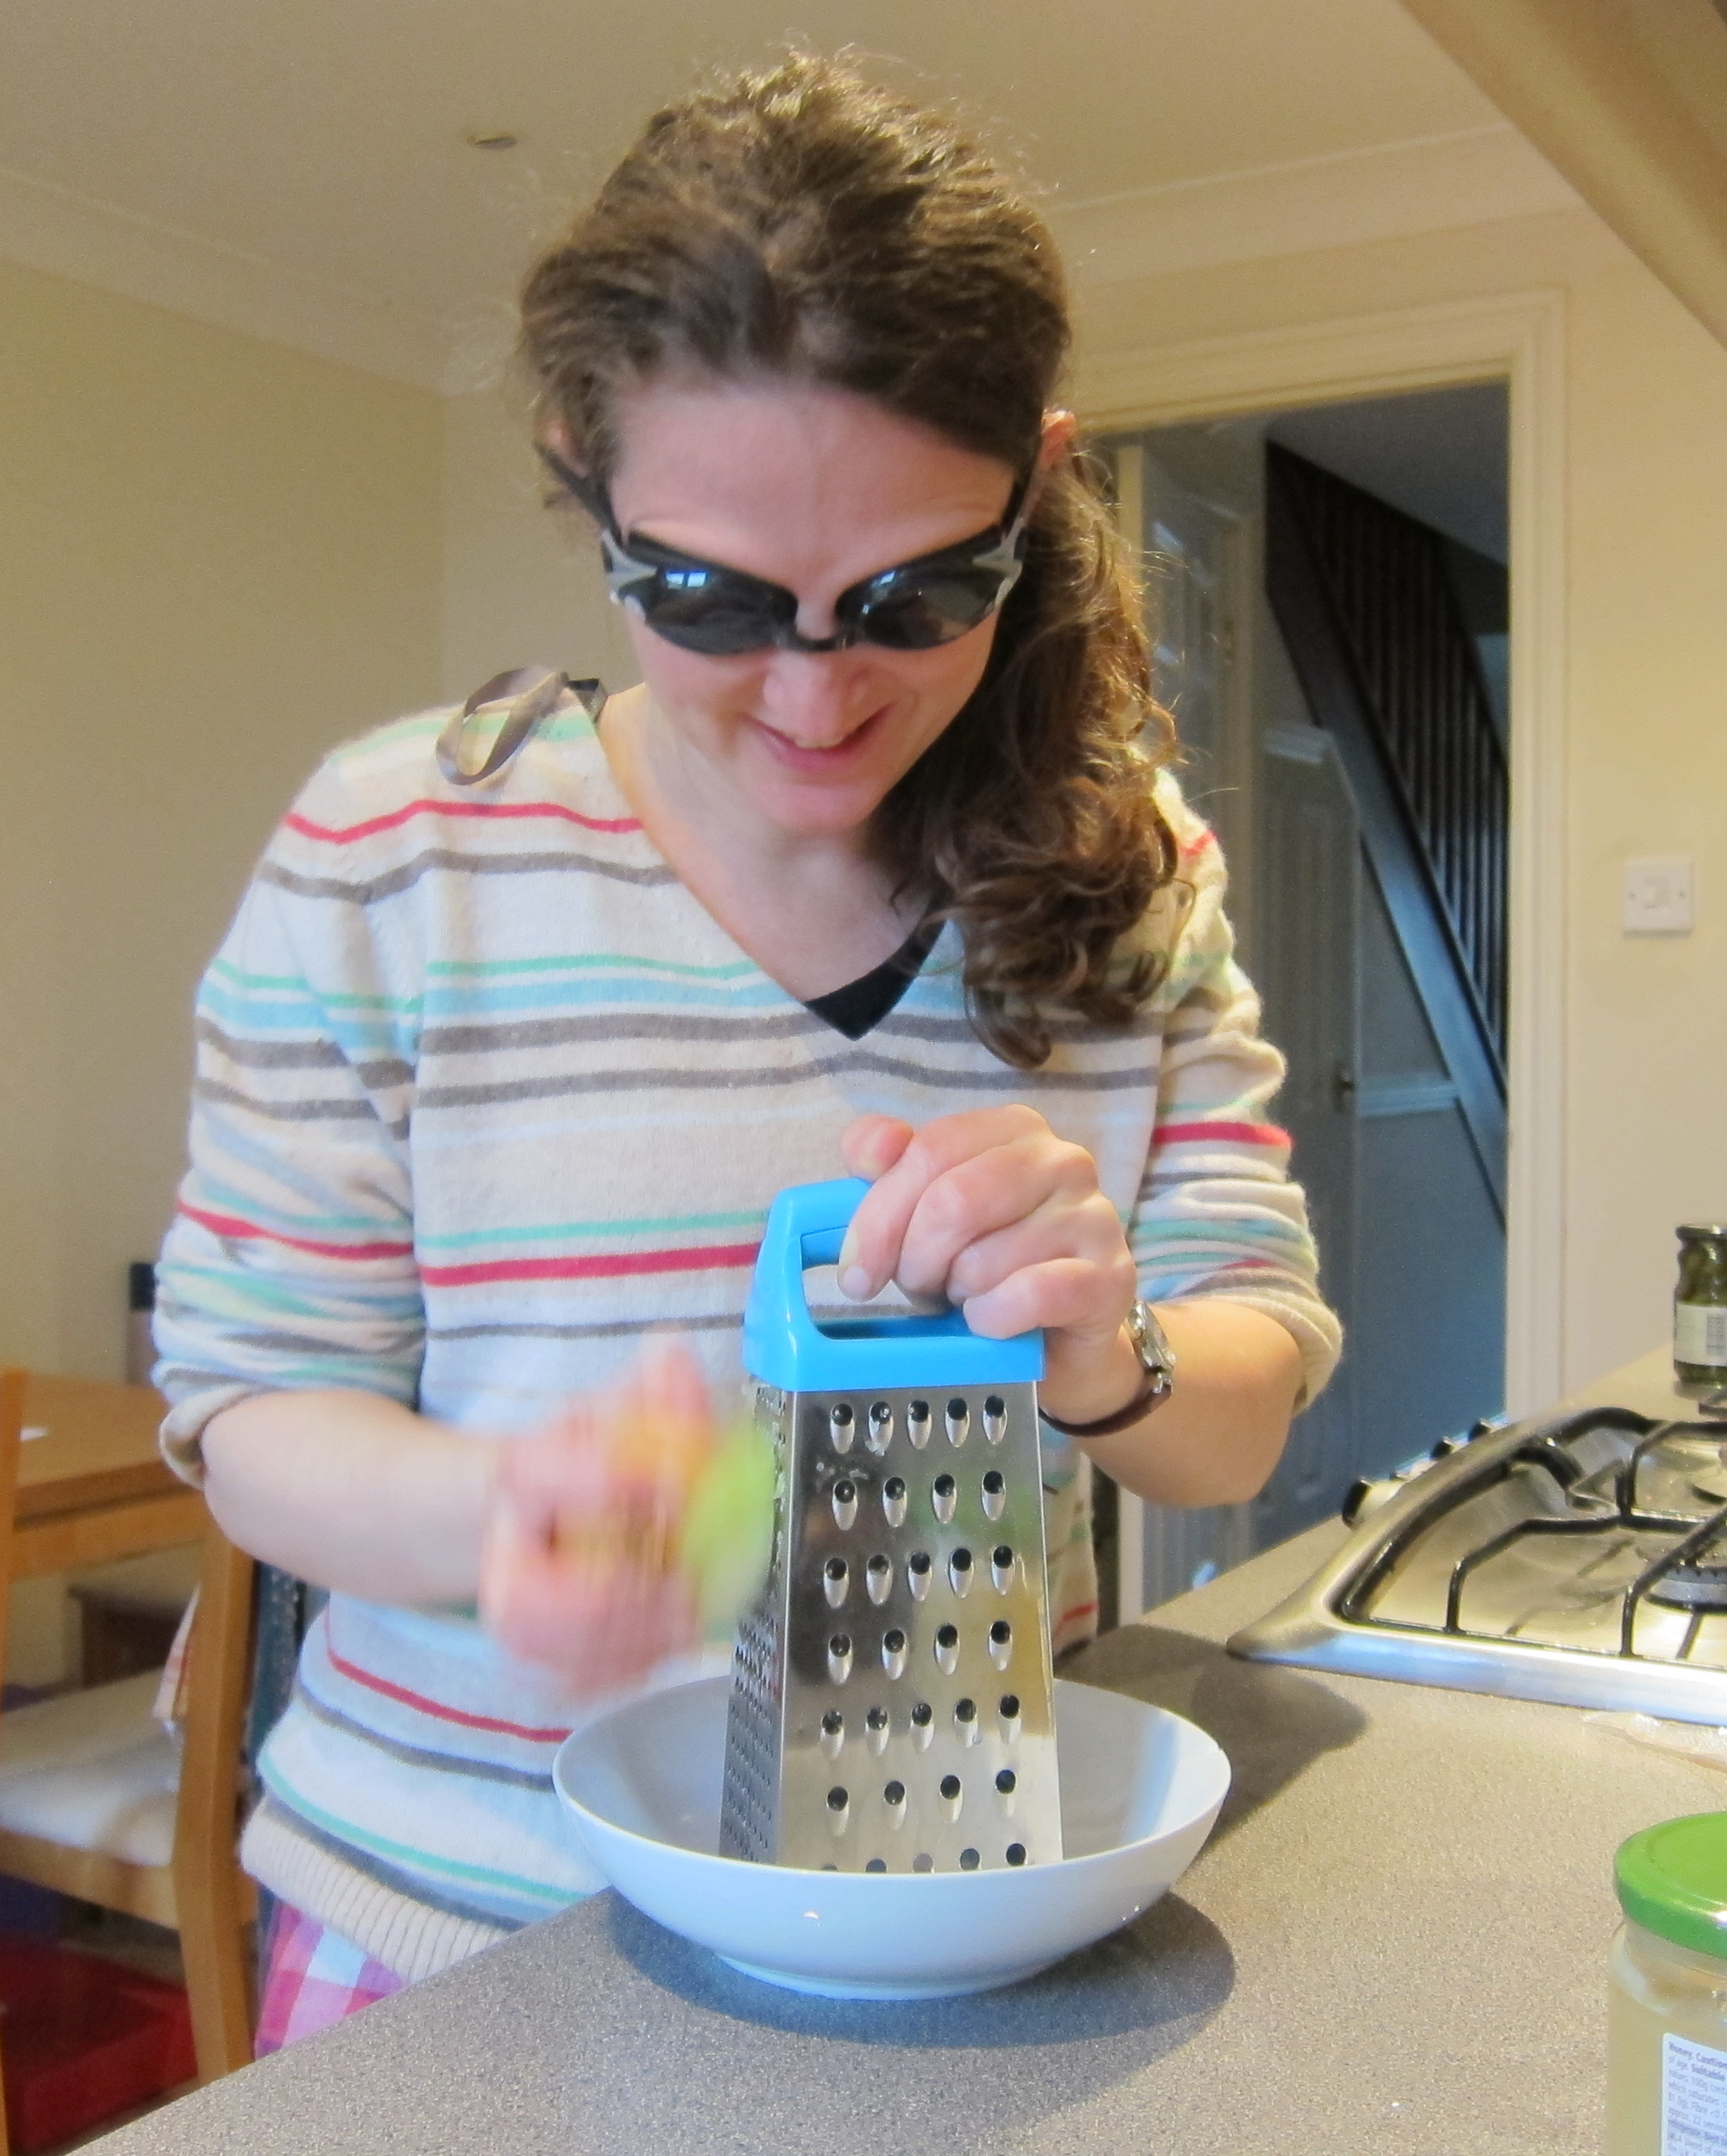 Dalya grating onions into a bowl while wearing goggles